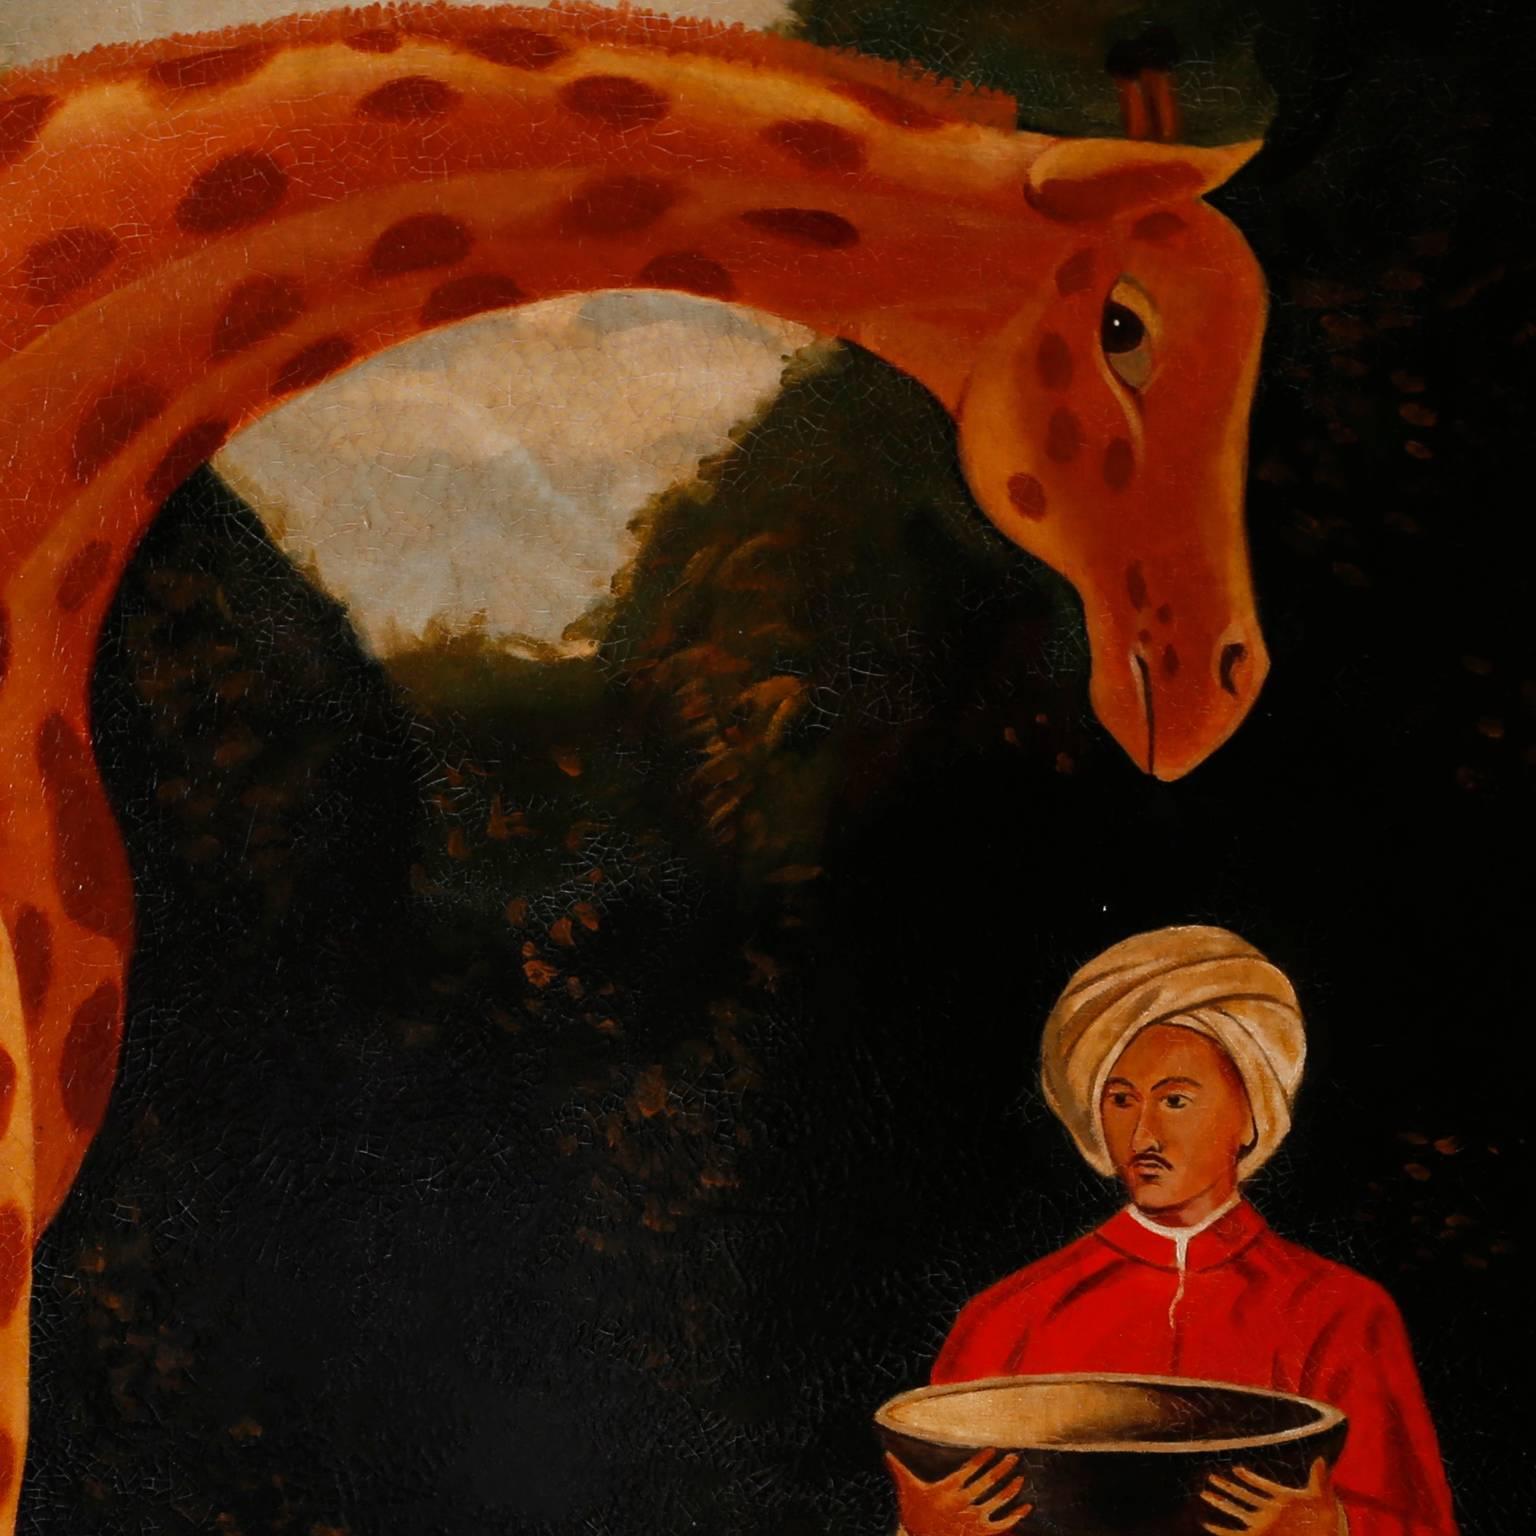 American Oil Painting on Canvas of a Giraffe by Reginald Baxter